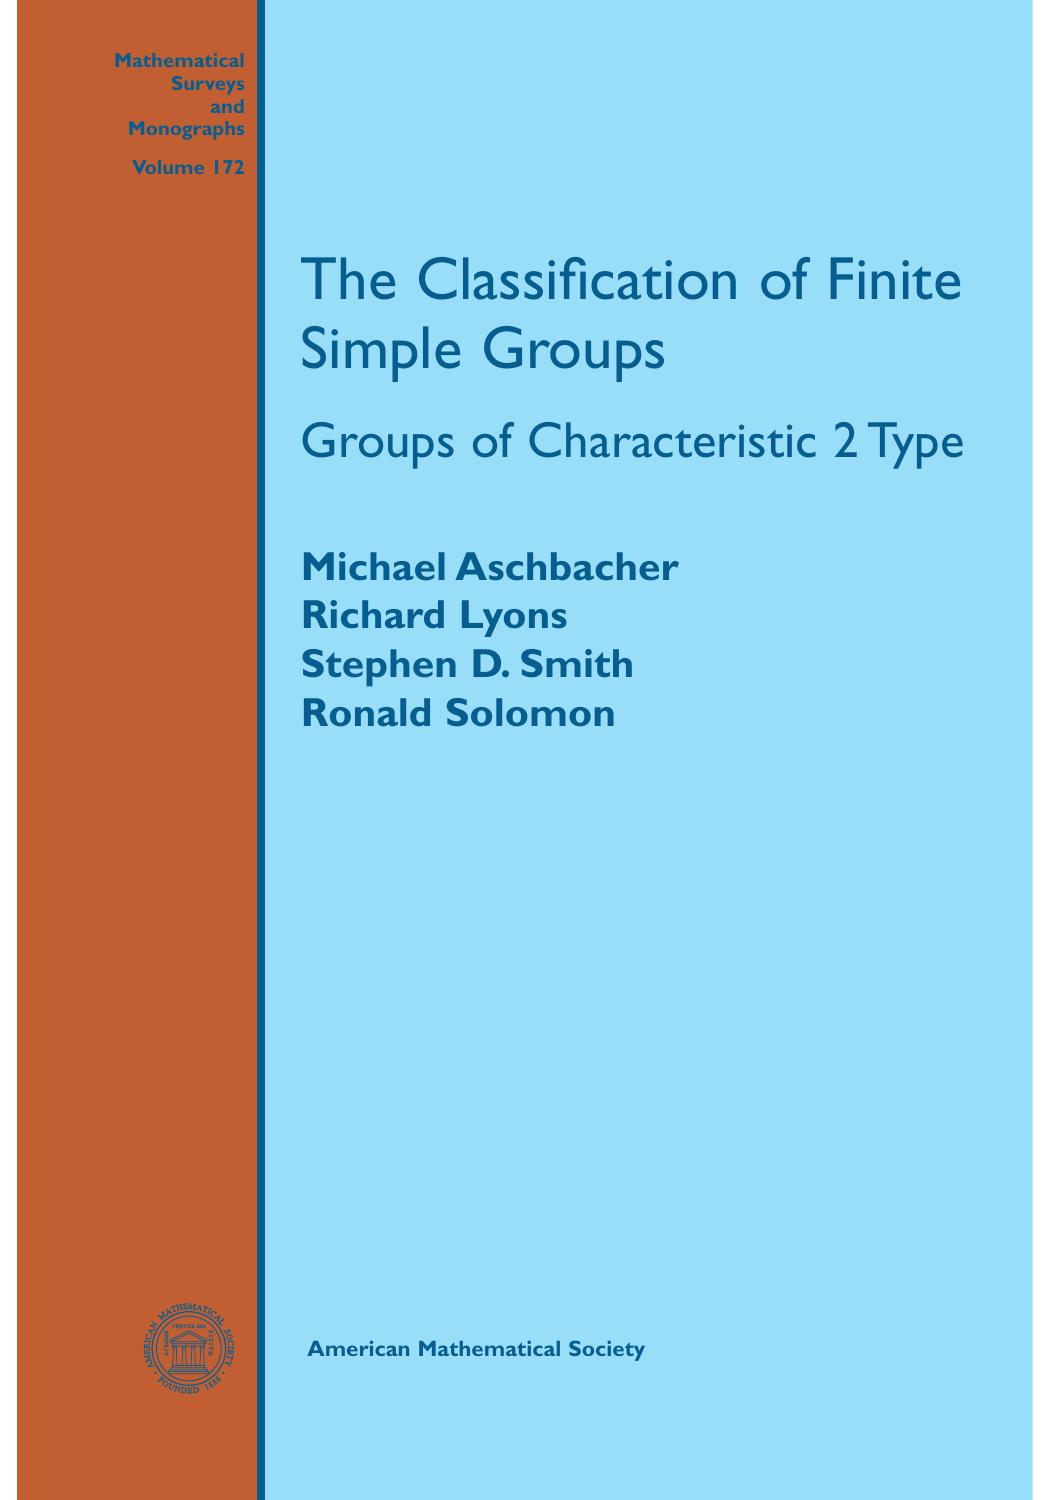 The Classification of Finite Simple Groups: Groups of Characteristic 2 Type